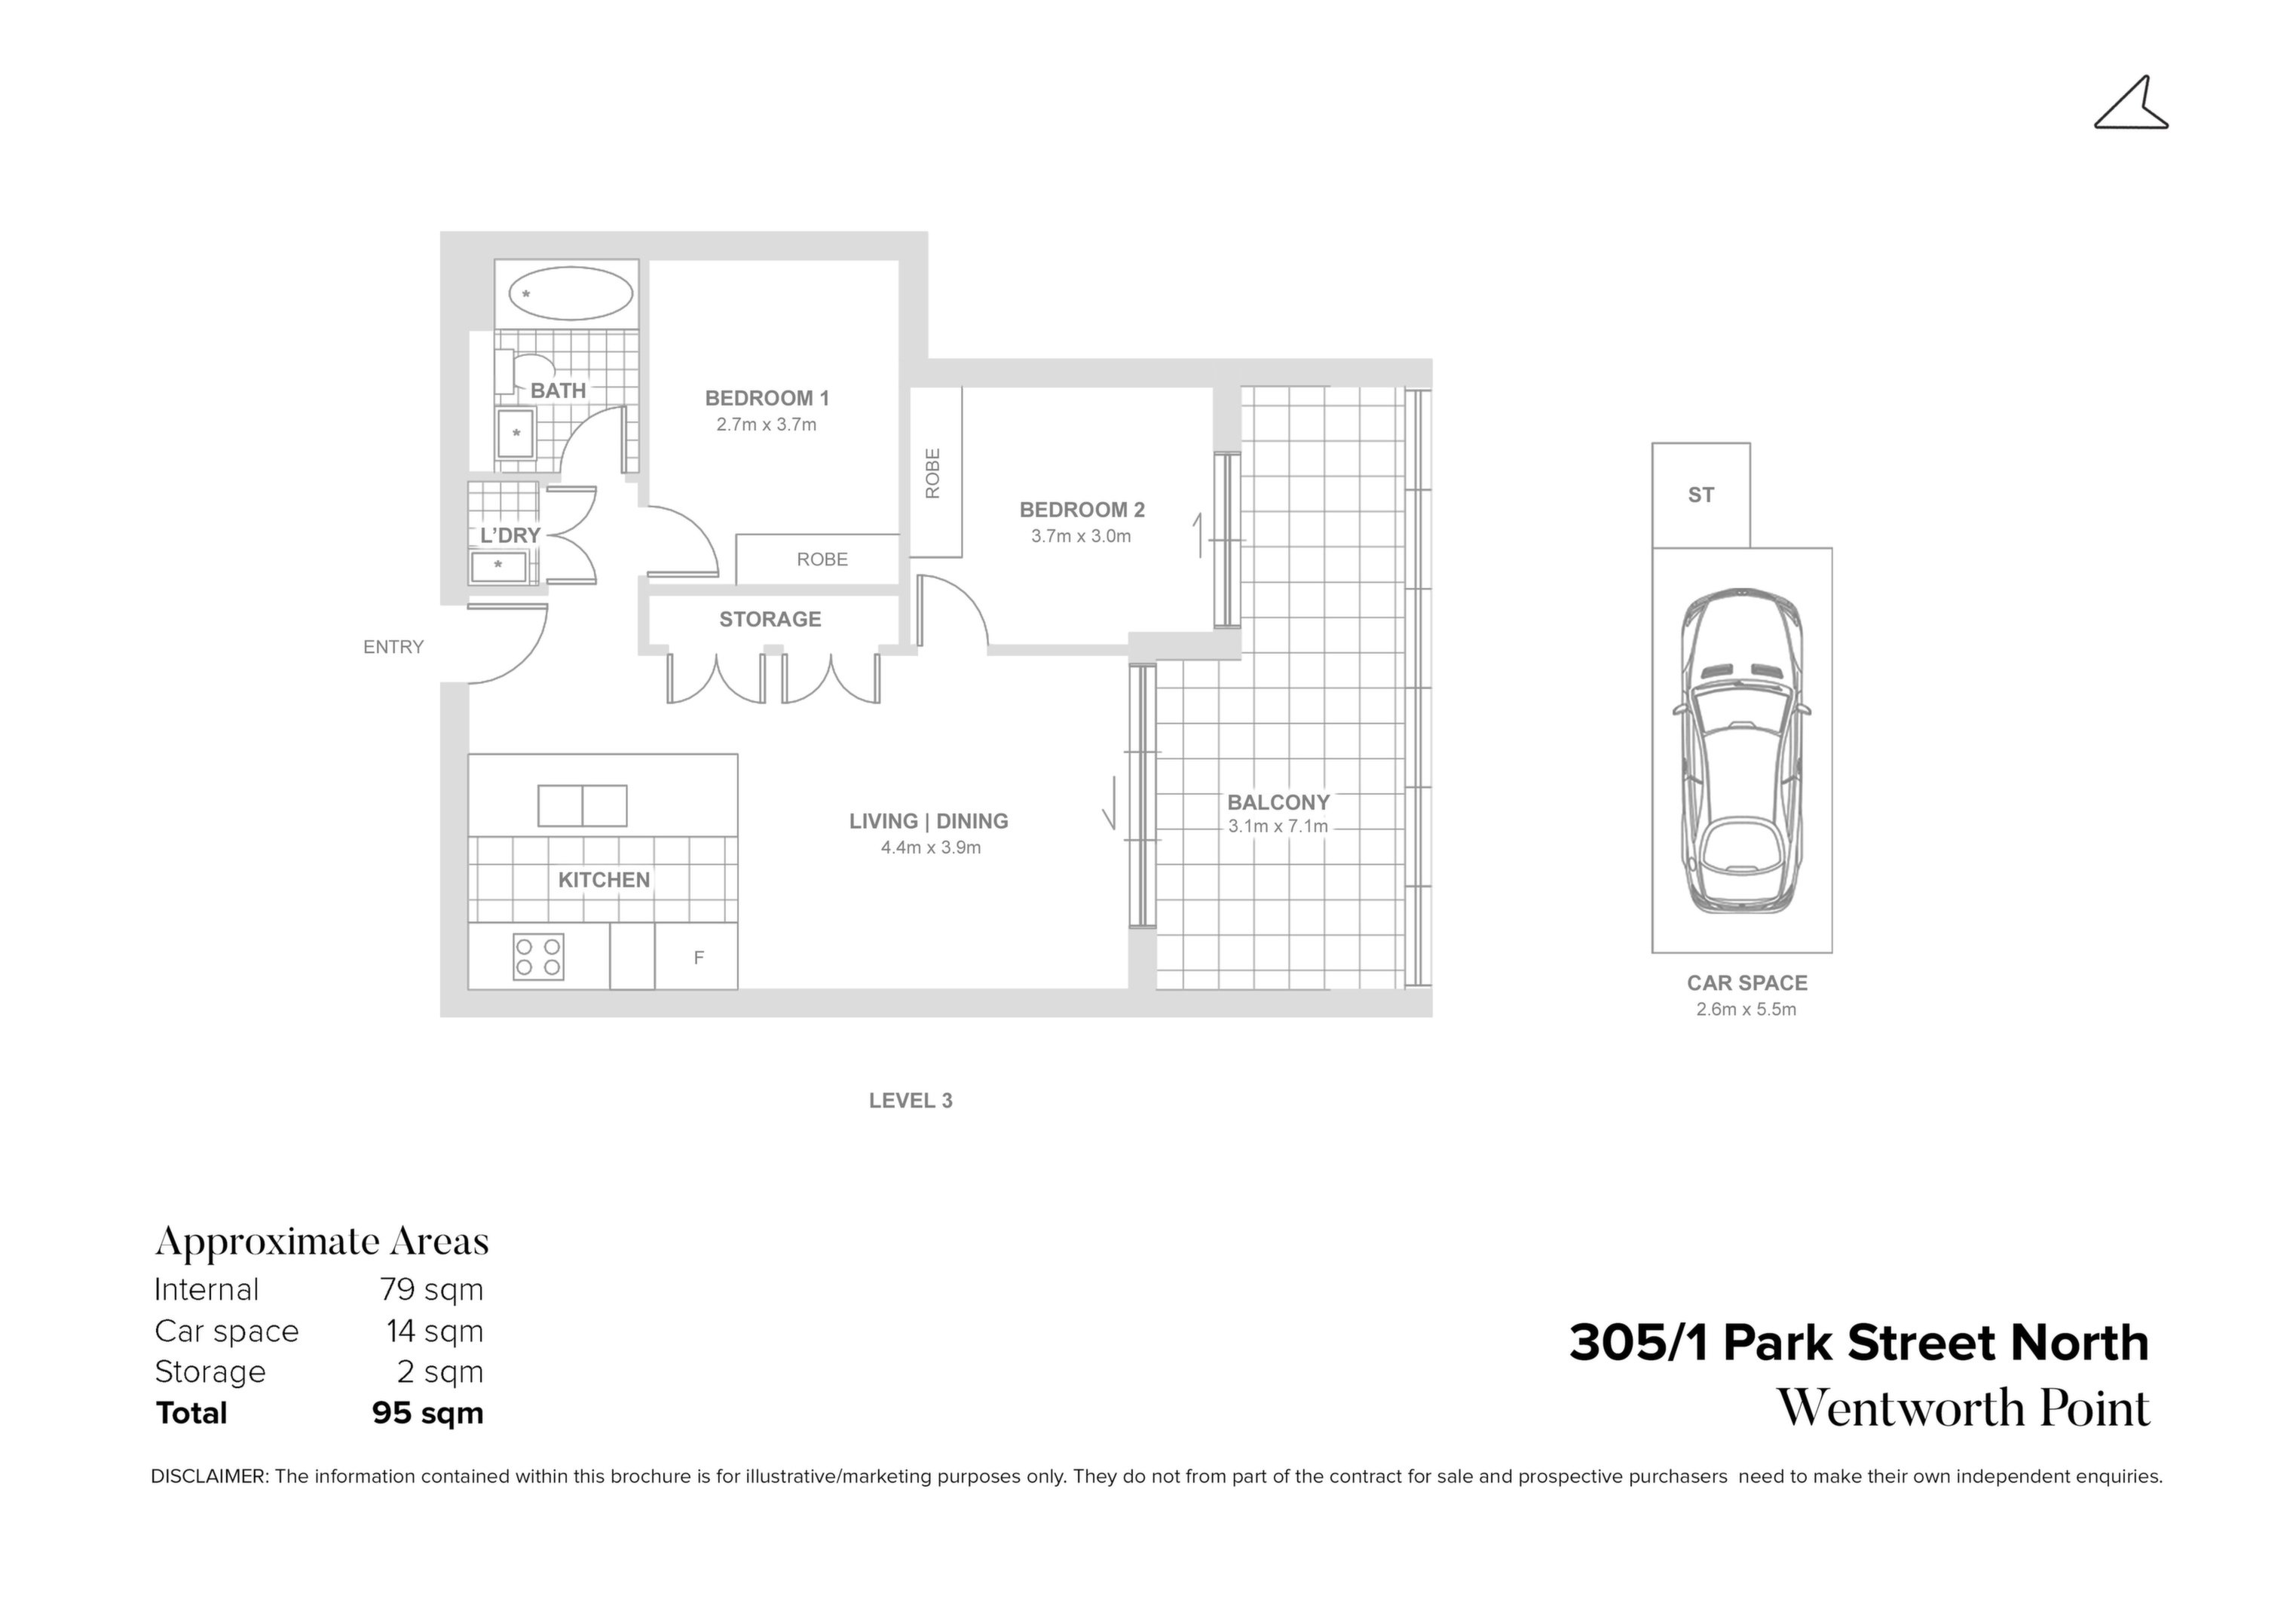 305/1 Park Street North, Wentworth Point Sold by Chidiac Realty - floorplan